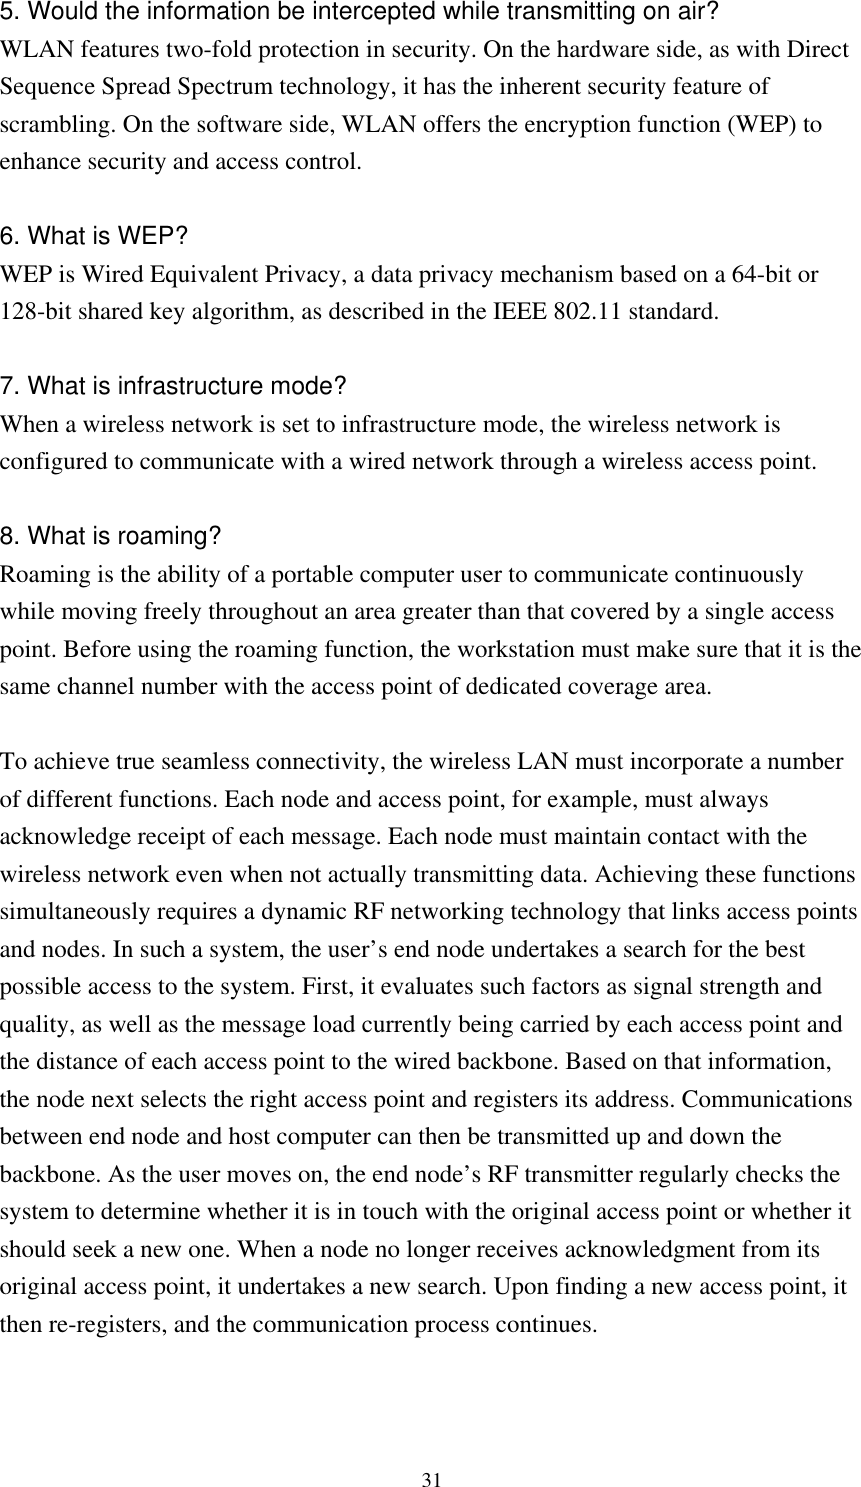  315. Would the information be intercepted while transmitting on air? WLAN features two-fold protection in security. On the hardware side, as with Direct Sequence Spread Spectrum technology, it has the inherent security feature of scrambling. On the software side, WLAN offers the encryption function (WEP) to enhance security and access control.  6. What is WEP? WEP is Wired Equivalent Privacy, a data privacy mechanism based on a 64-bit or 128-bit shared key algorithm, as described in the IEEE 802.11 standard.    7. What is infrastructure mode? When a wireless network is set to infrastructure mode, the wireless network is configured to communicate with a wired network through a wireless access point.  8. What is roaming? Roaming is the ability of a portable computer user to communicate continuously while moving freely throughout an area greater than that covered by a single access point. Before using the roaming function, the workstation must make sure that it is the same channel number with the access point of dedicated coverage area.  To achieve true seamless connectivity, the wireless LAN must incorporate a number of different functions. Each node and access point, for example, must always acknowledge receipt of each message. Each node must maintain contact with the wireless network even when not actually transmitting data. Achieving these functions simultaneously requires a dynamic RF networking technology that links access points and nodes. In such a system, the user’s end node undertakes a search for the best possible access to the system. First, it evaluates such factors as signal strength and quality, as well as the message load currently being carried by each access point and the distance of each access point to the wired backbone. Based on that information, the node next selects the right access point and registers its address. Communications between end node and host computer can then be transmitted up and down the backbone. As the user moves on, the end node’s RF transmitter regularly checks the system to determine whether it is in touch with the original access point or whether it should seek a new one. When a node no longer receives acknowledgment from its original access point, it undertakes a new search. Upon finding a new access point, it then re-registers, and the communication process continues.   